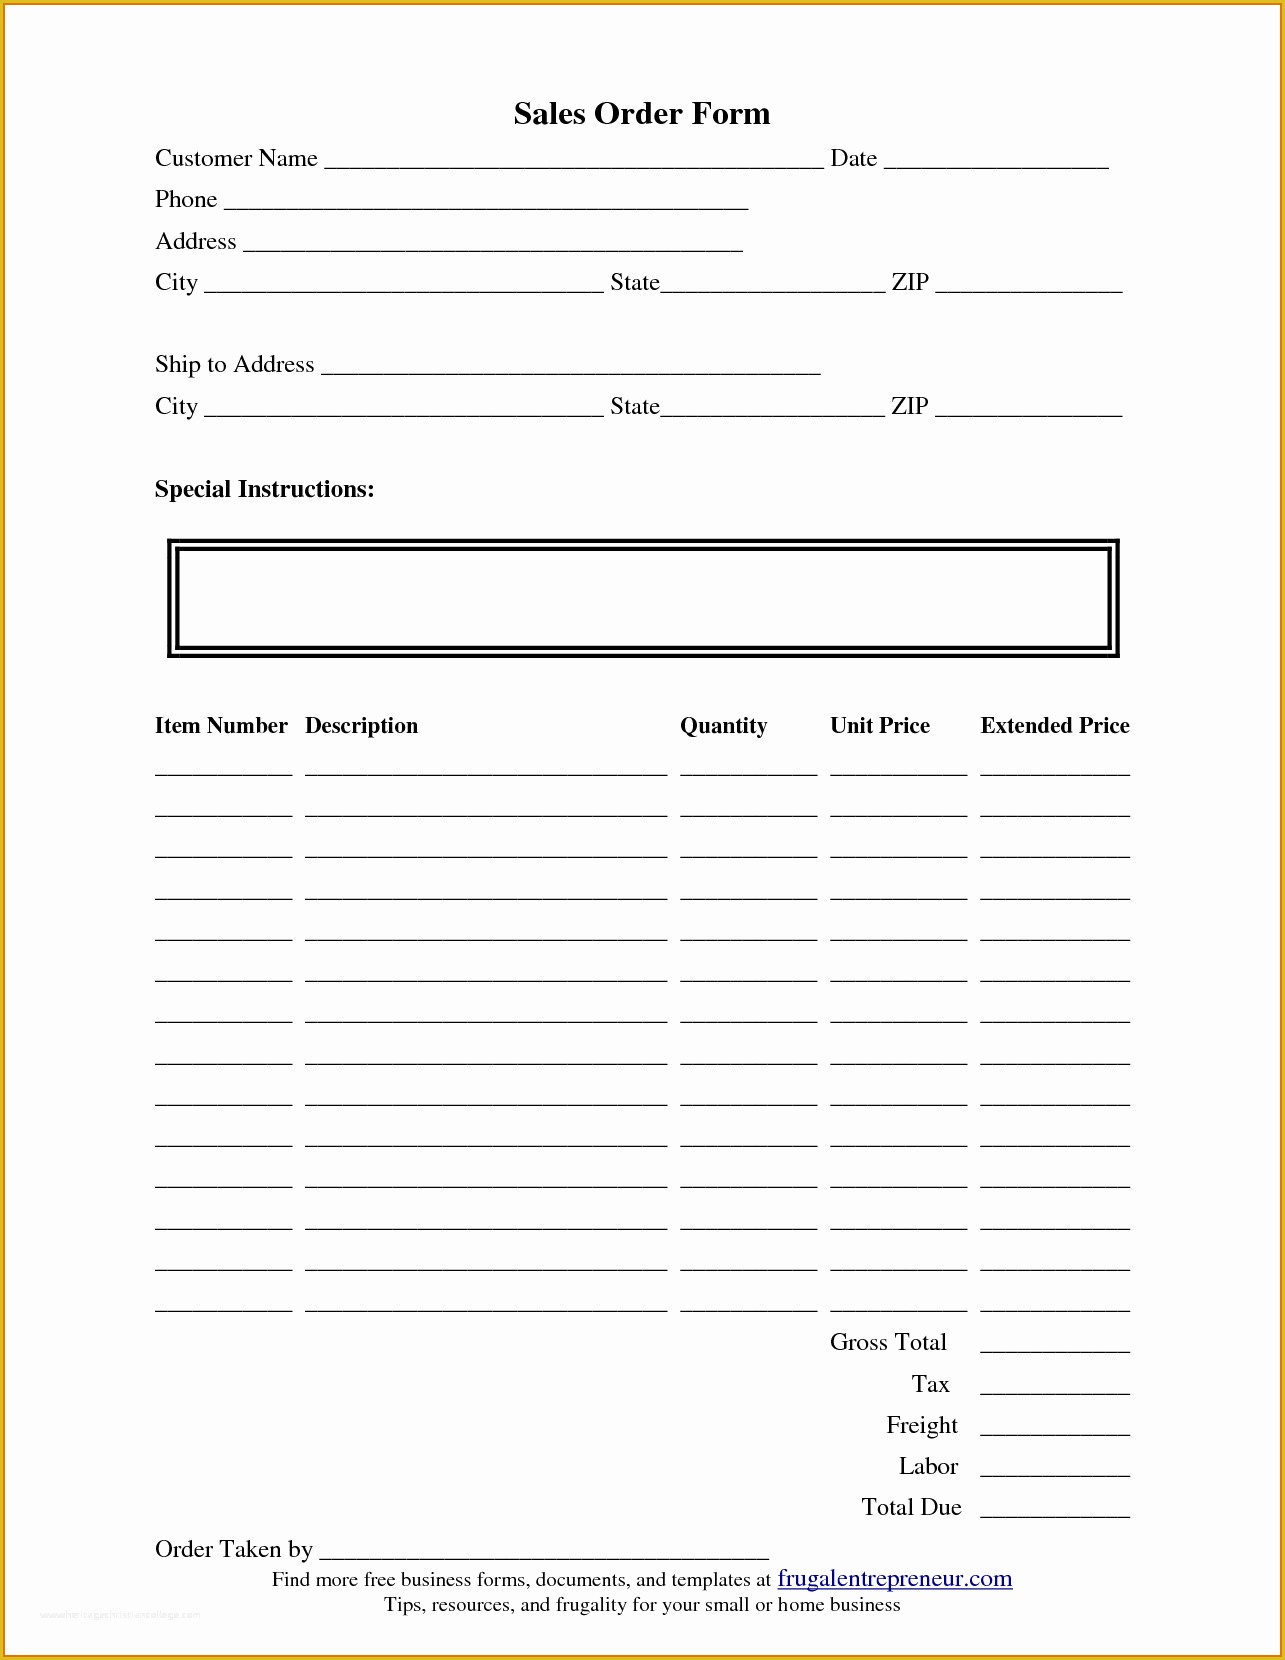 Picture order form Template Free Of 8 order form Template Freereference Letters Words